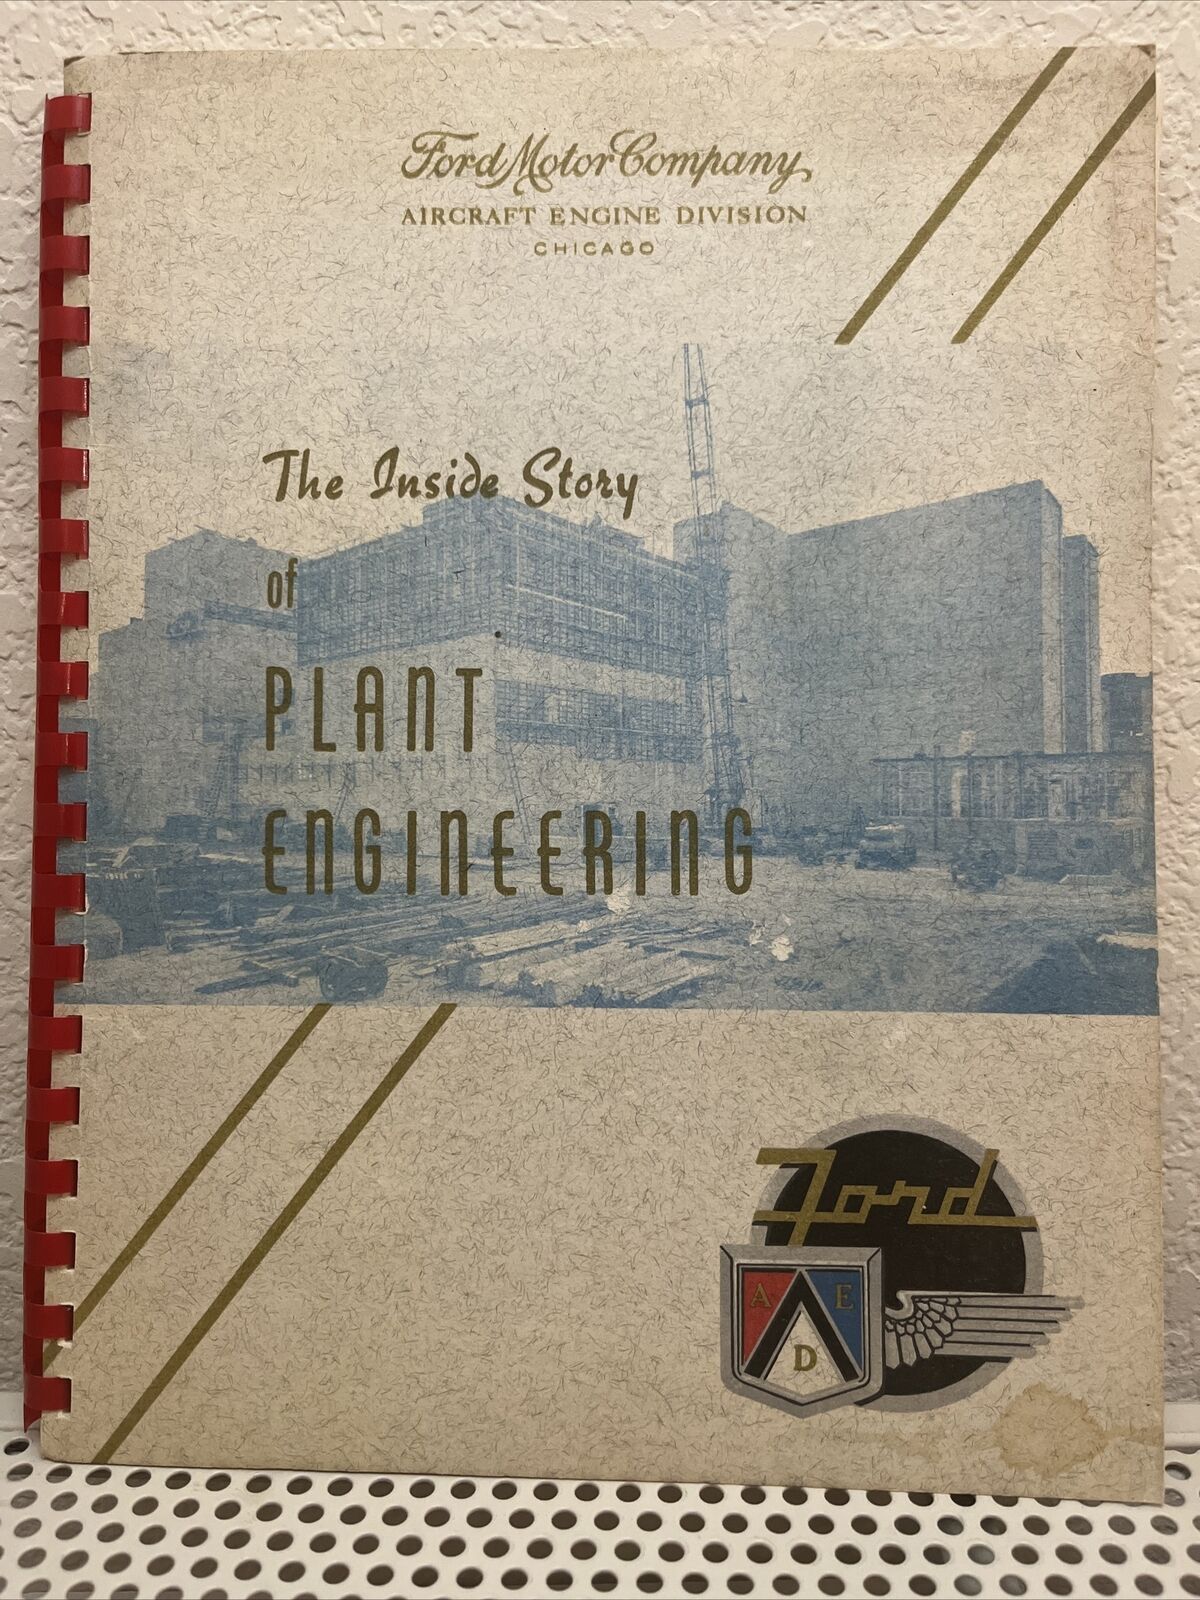 Plant Engineering Ford Aircraft Engine Division Book 1955 Memorabilia Military